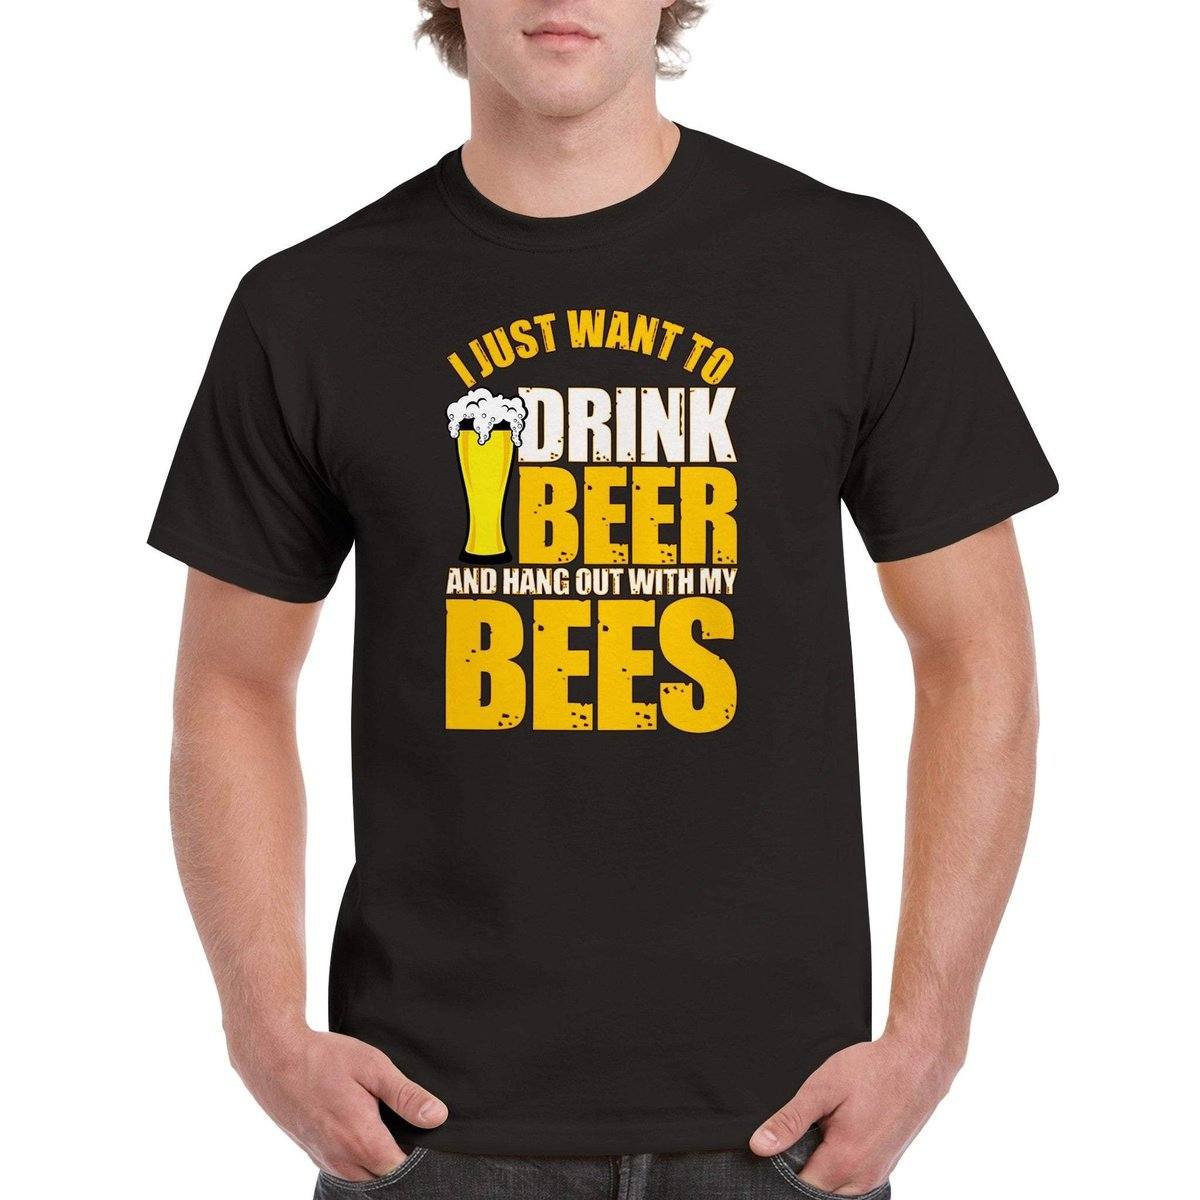 I Just Want To Drink Beer And Hang Out With My Bees T-Shirt - Funny Bee Beer Tshirt - Unisex Crewneck T-shirt Australia Online Color